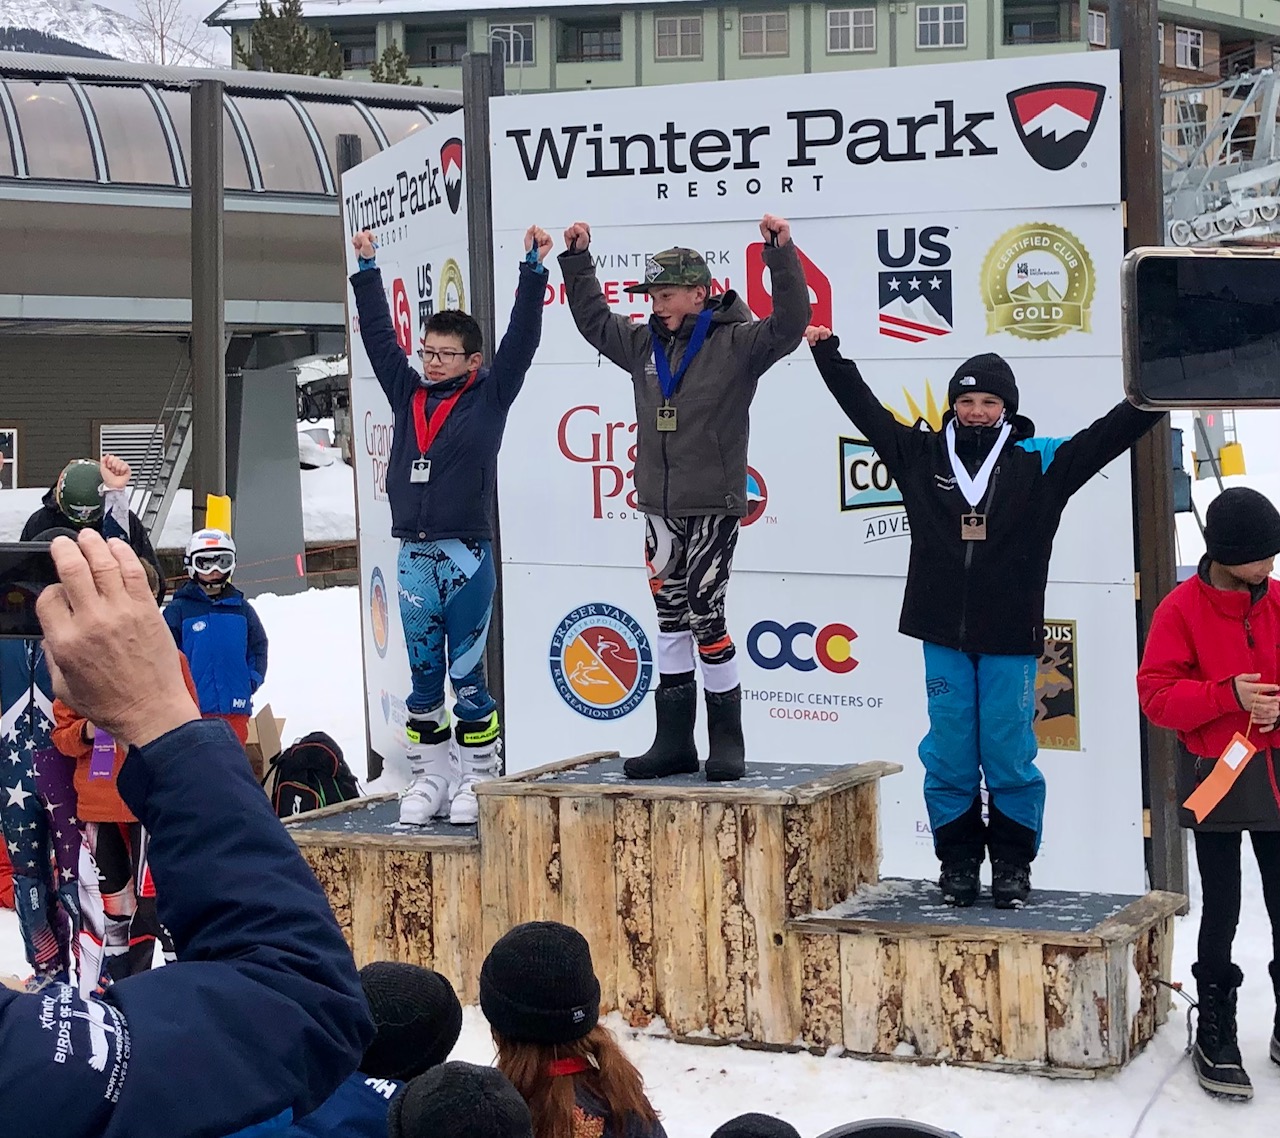 Nate Jolly had a great day with 3rd in GS and 4th in SL for U12 boys 